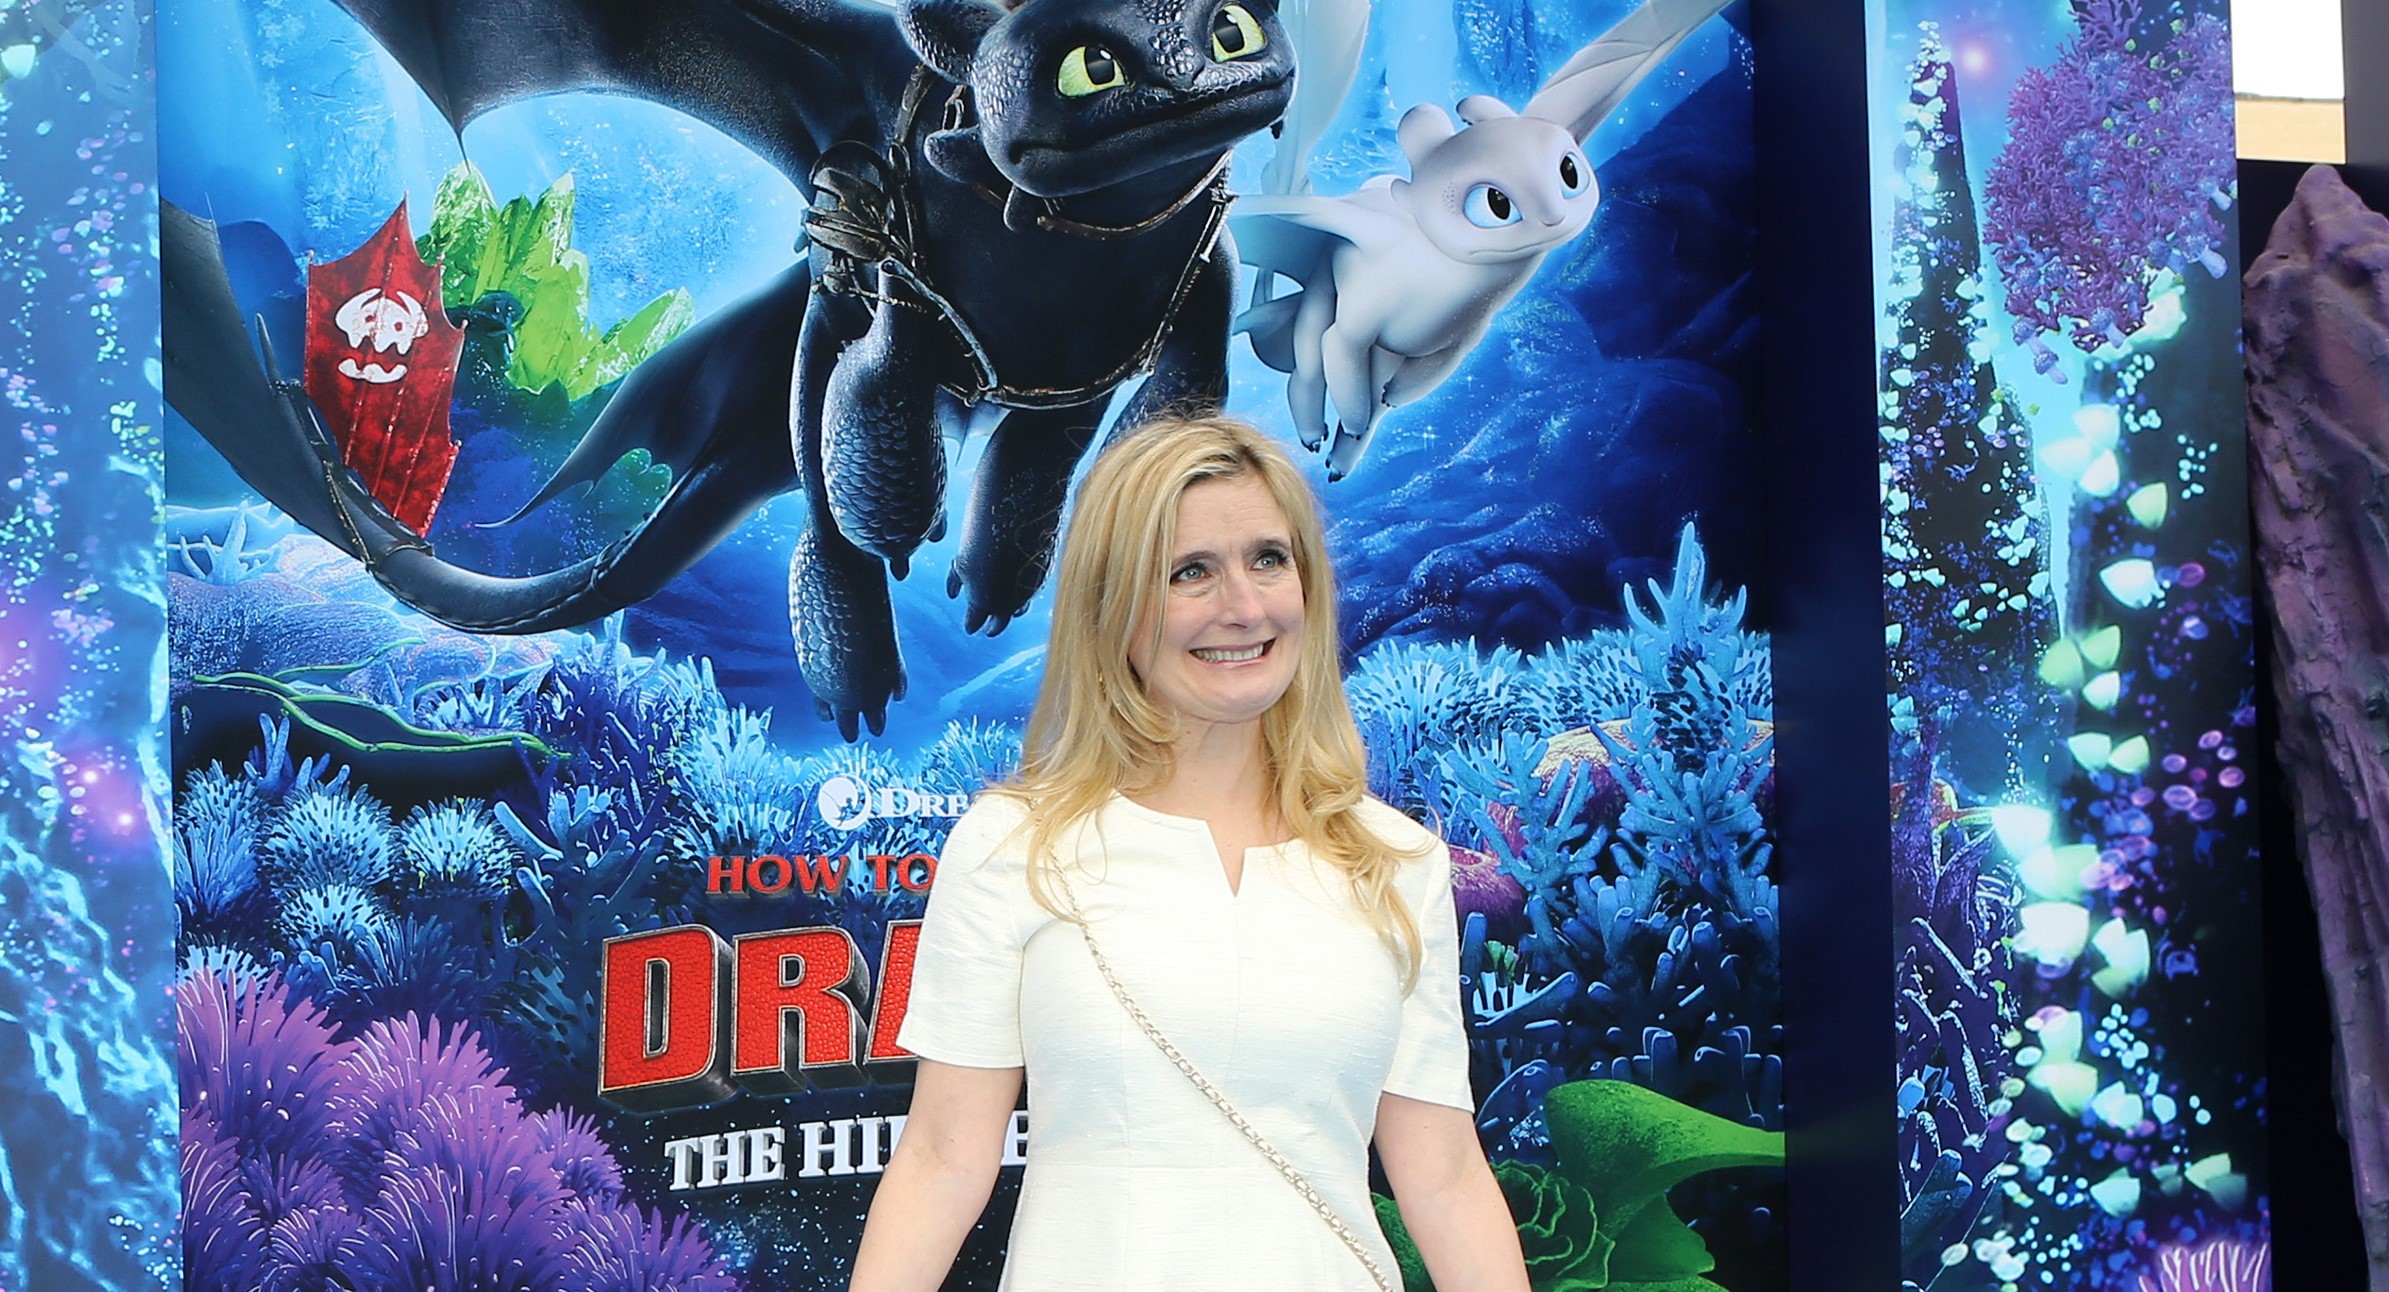 'It is when times are hardest that we need the transformative magic of books and creativity the most.' – Cressida Cowell